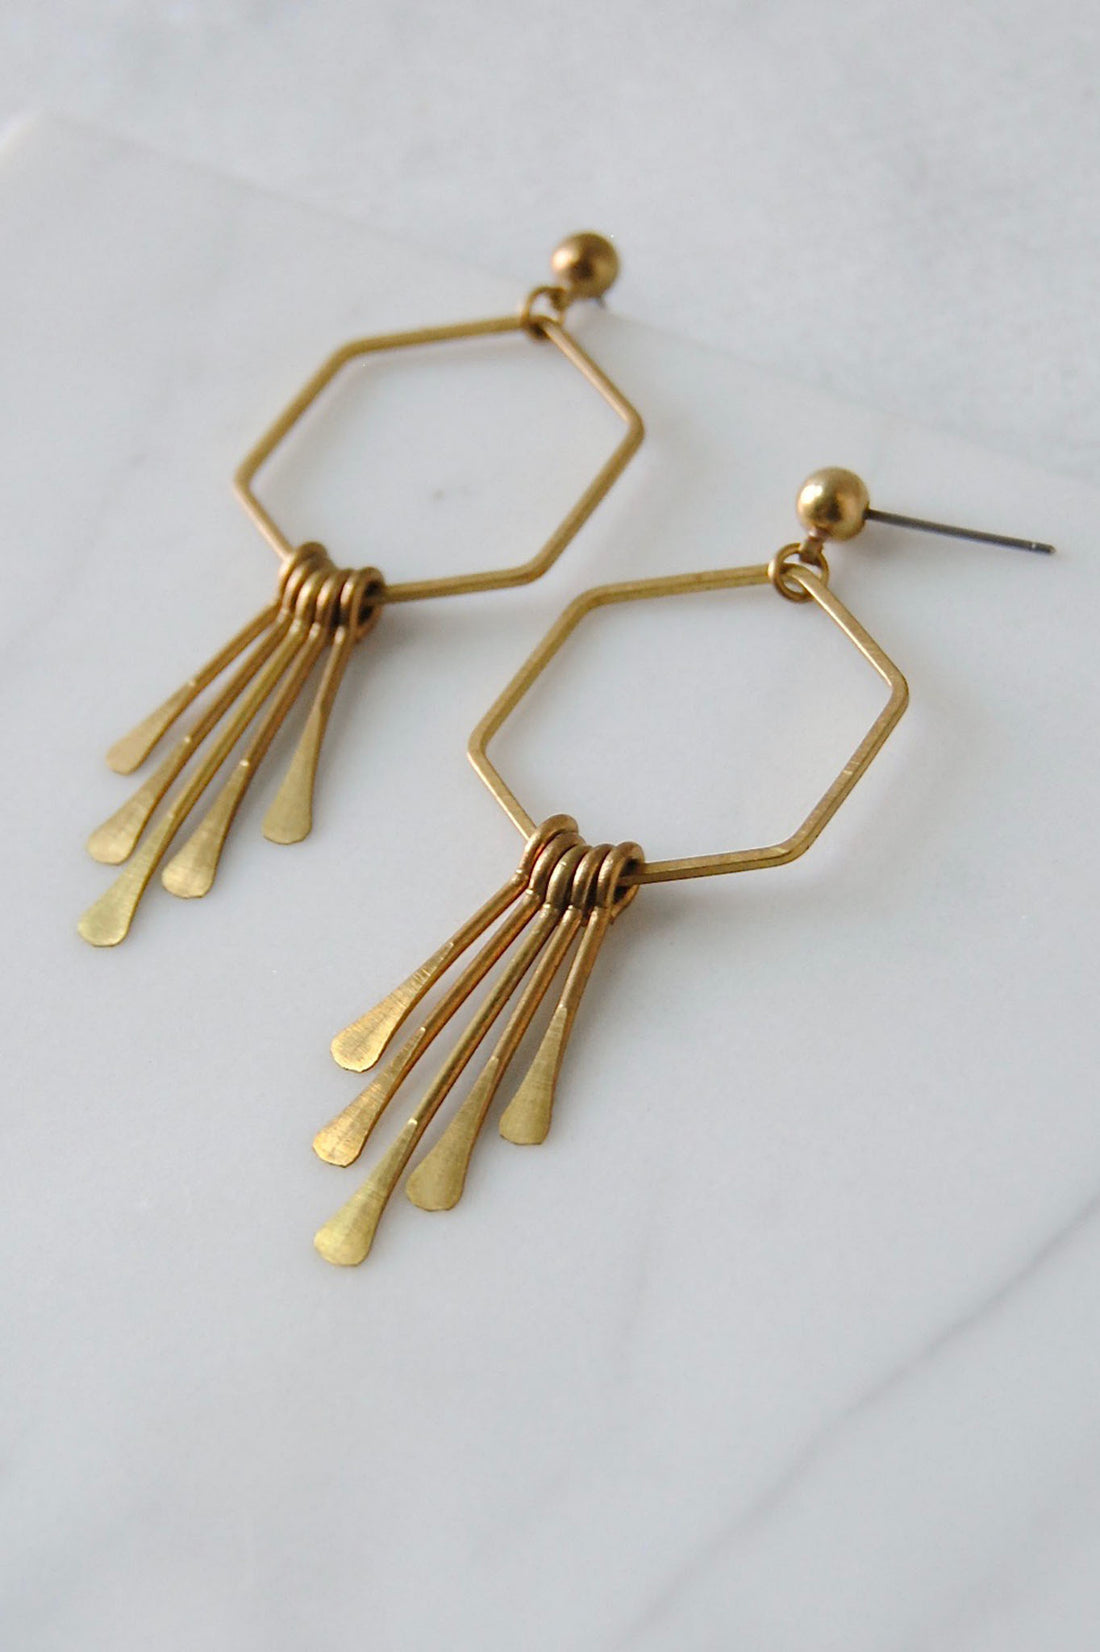 Sunburst earrings made from hammered hexagon loop and hammered brass dangles set on a stud post